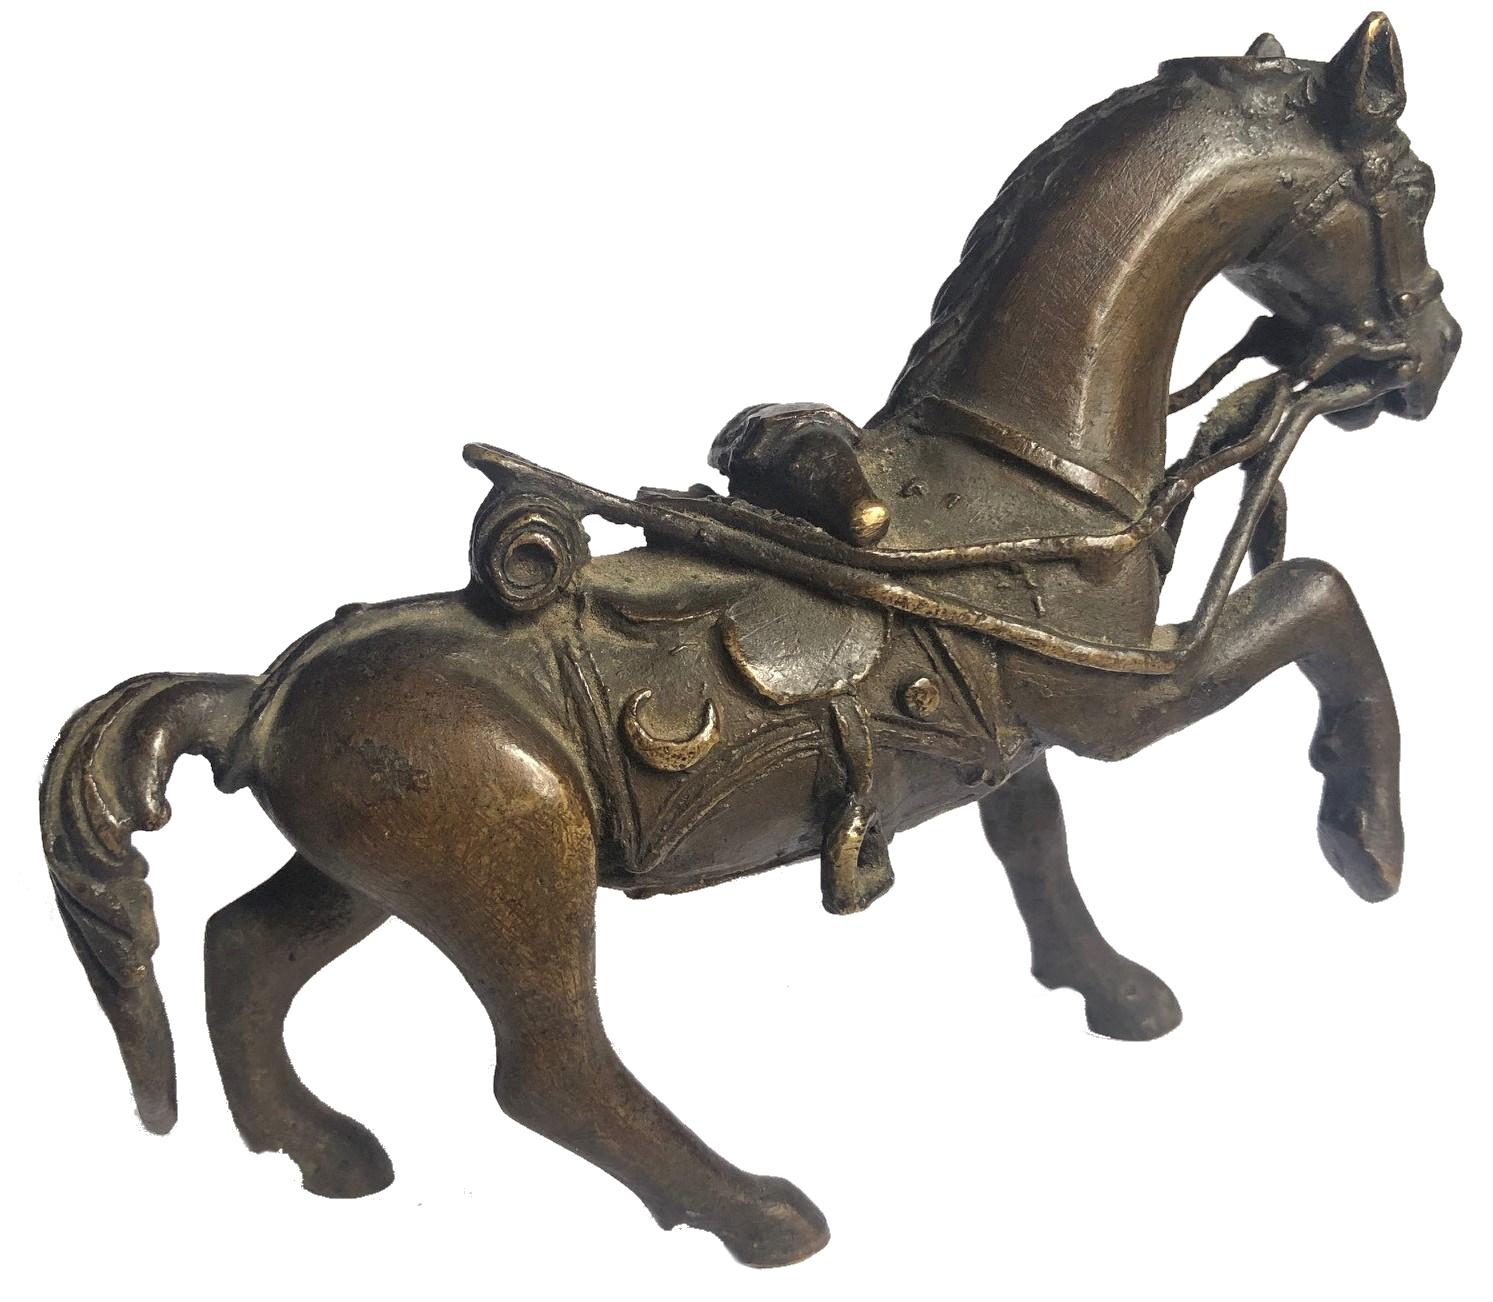 This little antique Tibetan equestrian figurine is distinguished not only by the remarkably detailed sculpture of a horse in a complete harness, but also by the high quality of the bronze casting and its original dark-brown patina.

Judging by the